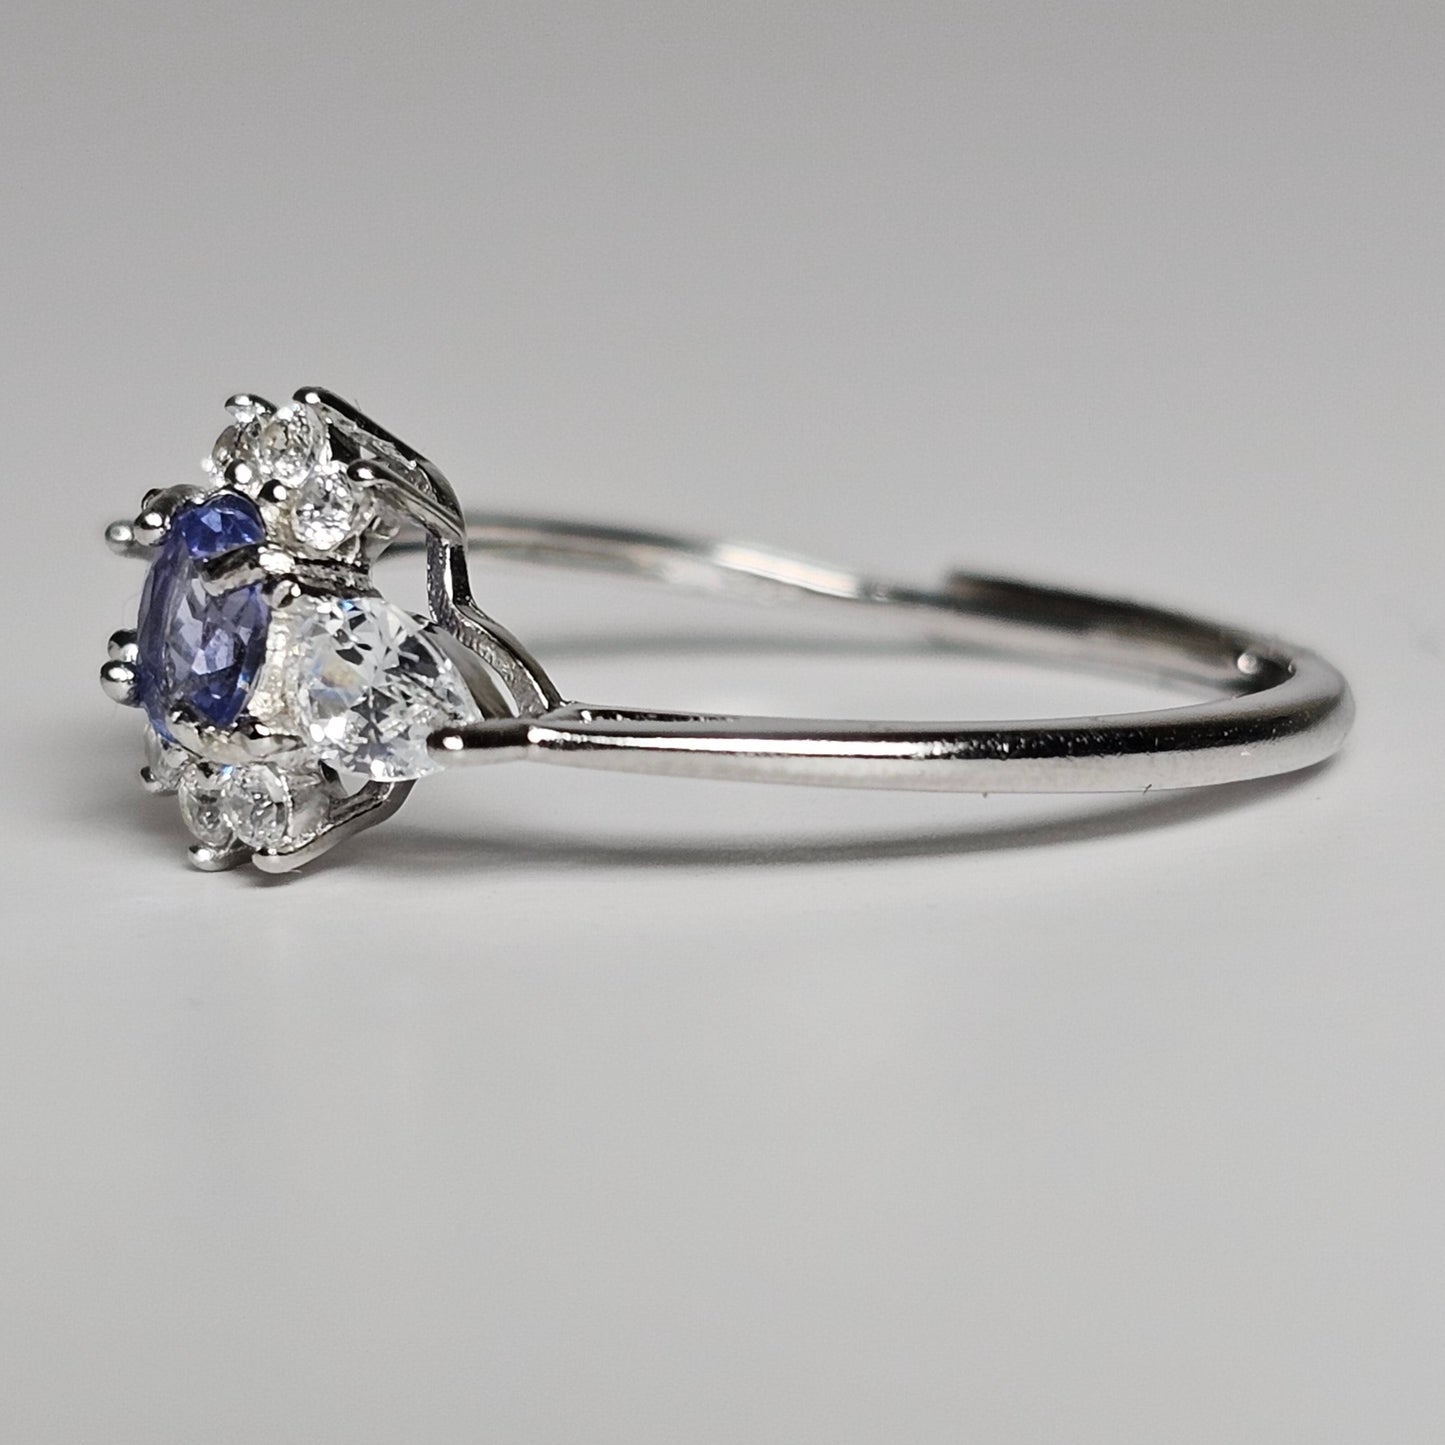 This adjustable ring is crafted from sterling silver and features a beautiful oval shaped Tanzanite centre stone surrounded with zircon.